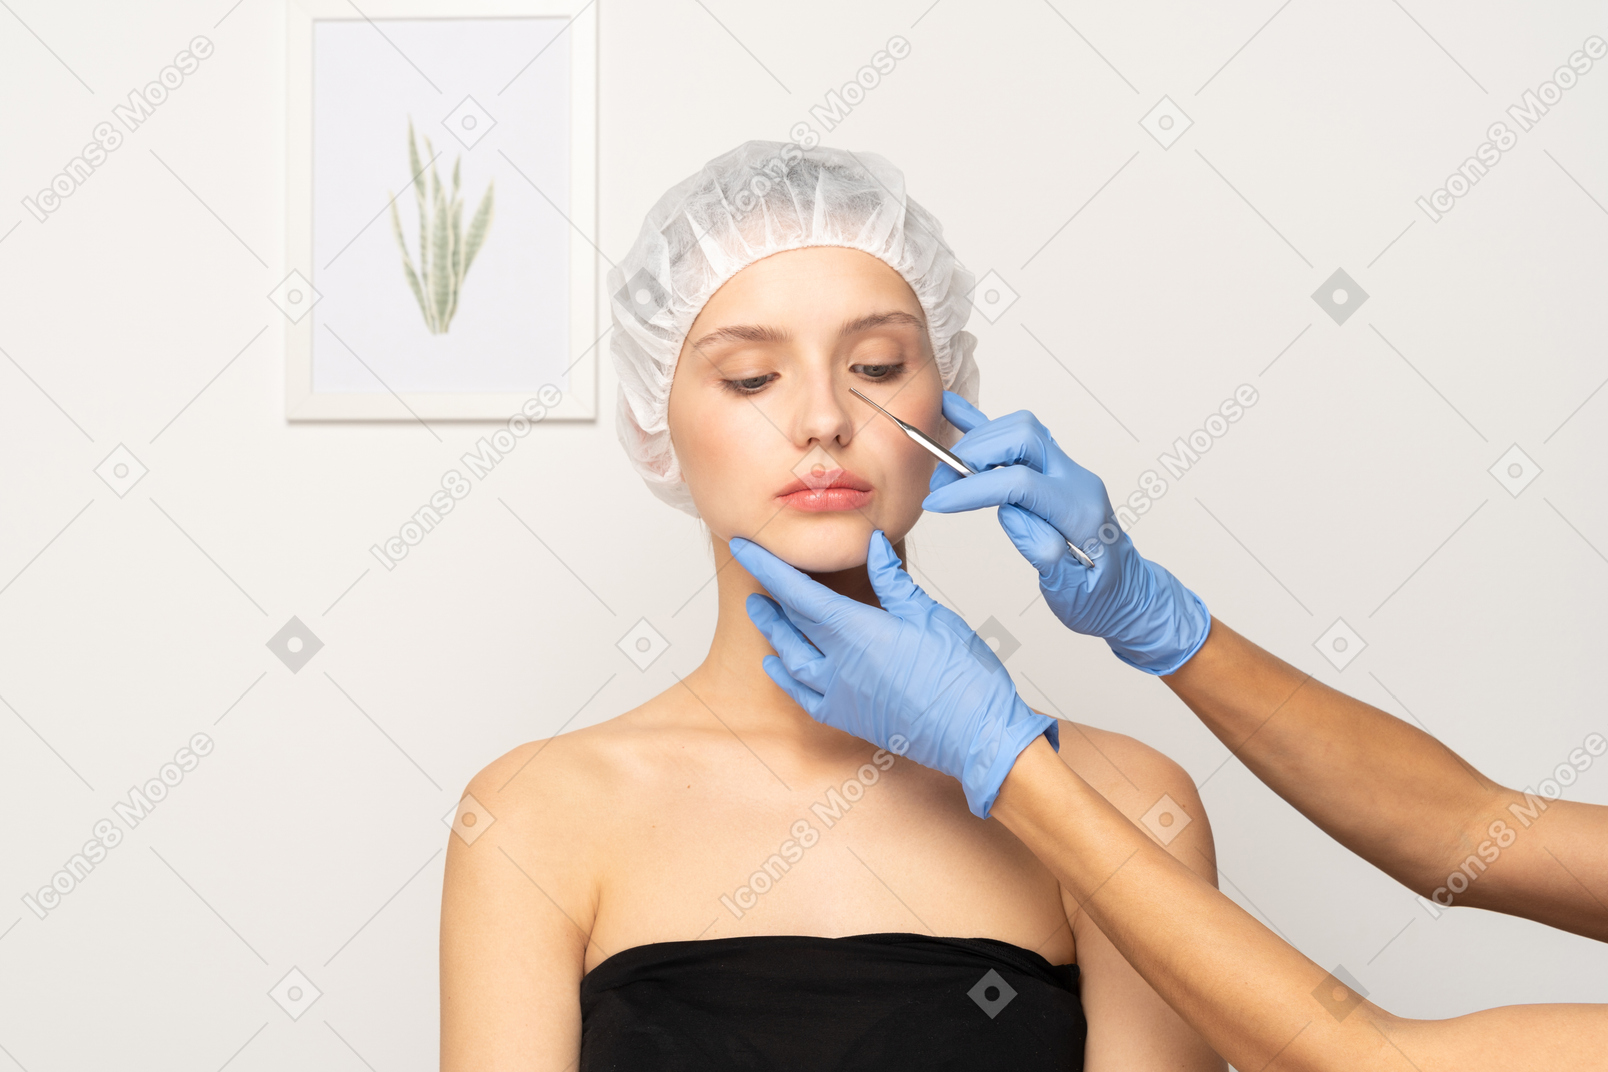 Plastic surgeon holding scalpel near young woman's face